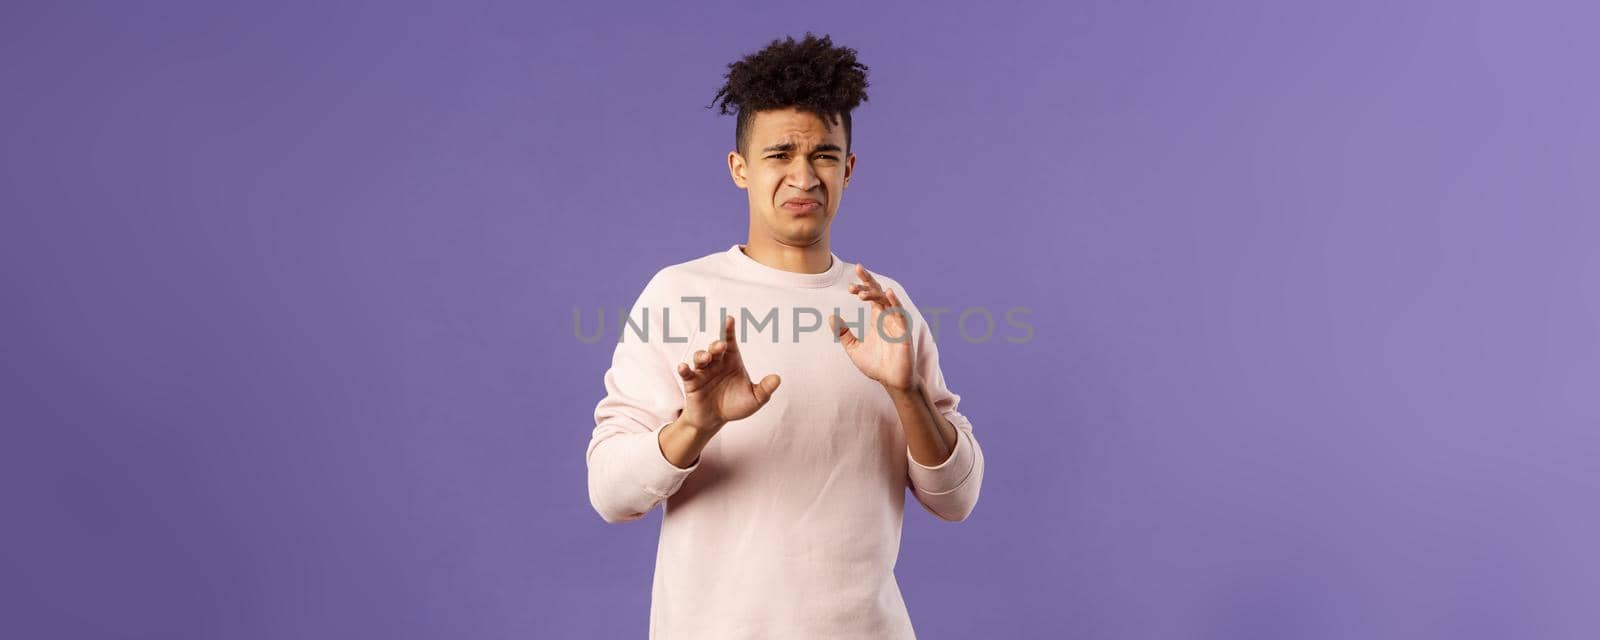 Phew get it away from me. Portrait of disgusted young man smelling something awful, step away and blocking it with raised arms, refuse grimacing with aversion and reluctance, purple background.